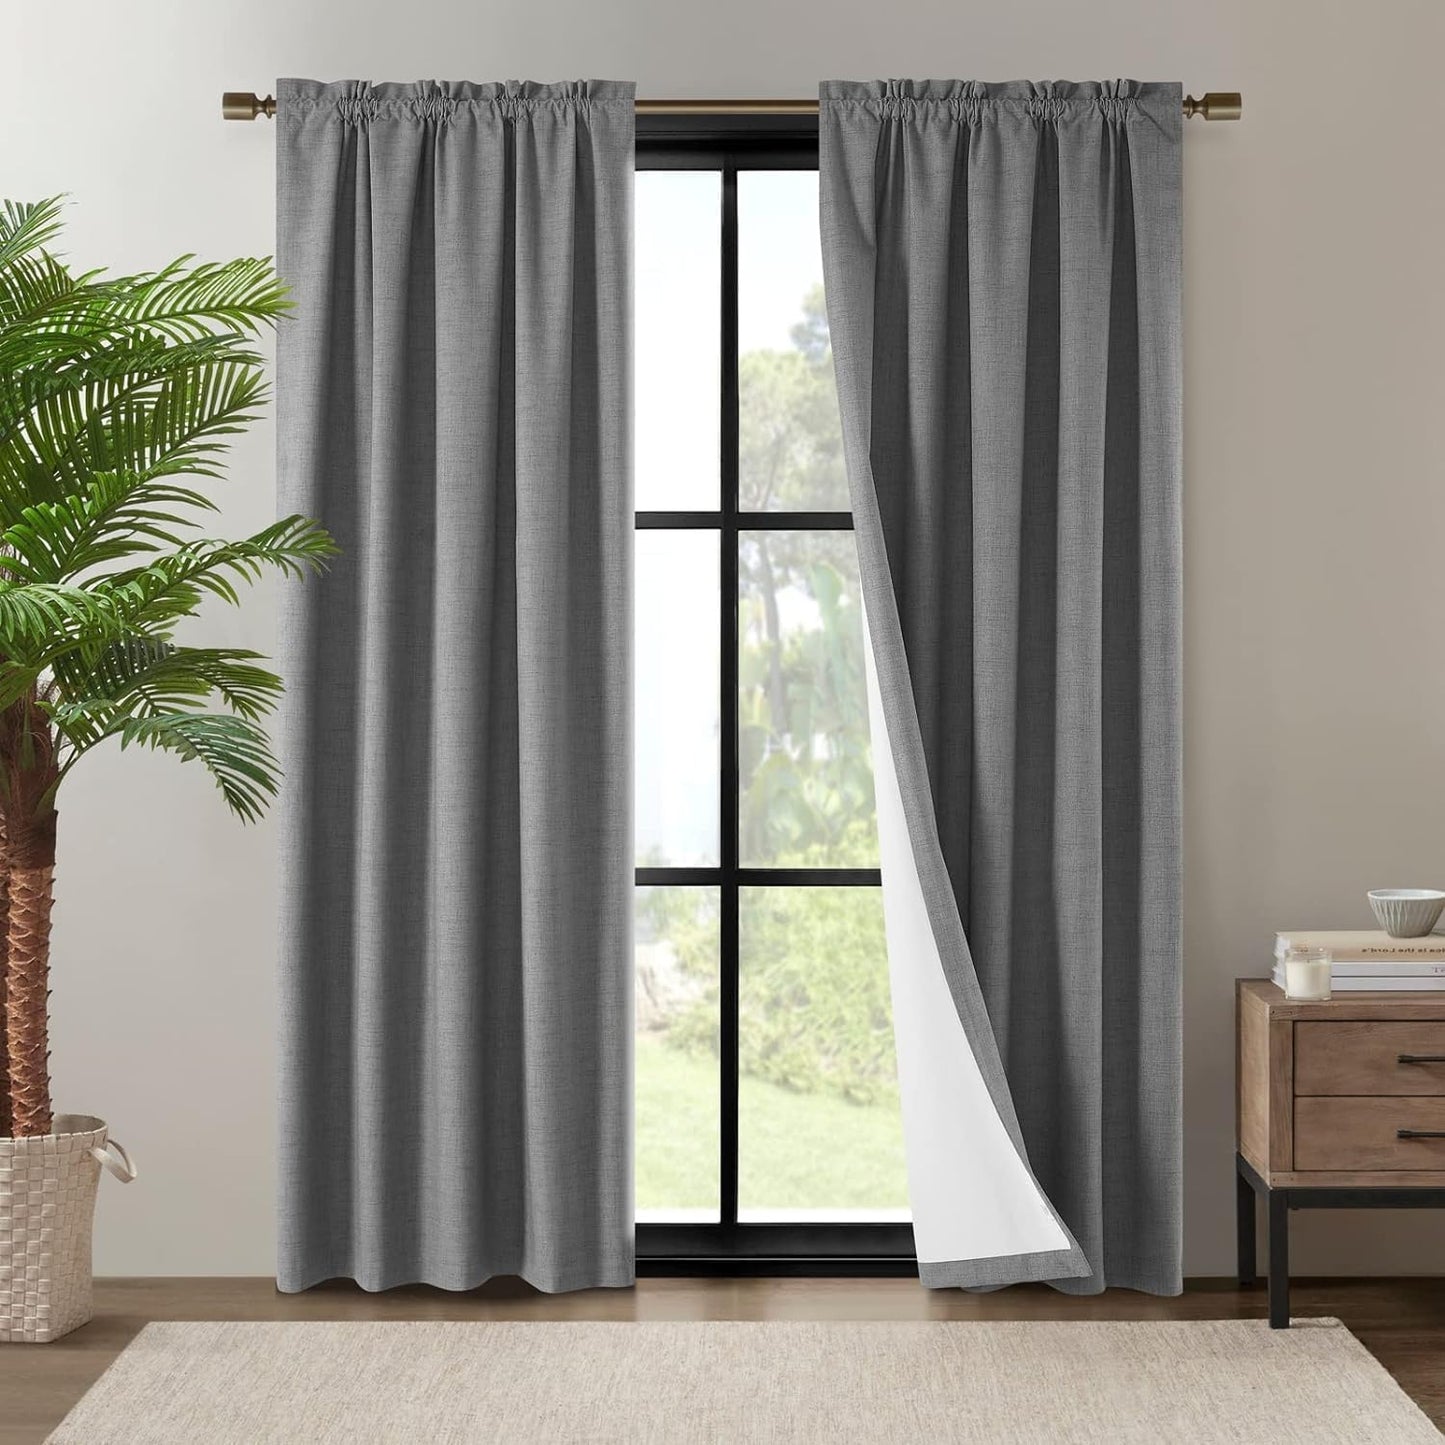 Dreaming Casa Linen Blackout Curtains for Beadroom 2 Panels 96 Inch Long Living Room Drapes Boho Rustic 100% Black Out Natural Window Curtain with Rod Pocket, 52" W X 96" L  Dreaming Casa Grey, Rod Pocket 2 X (72"W X 84"L) 